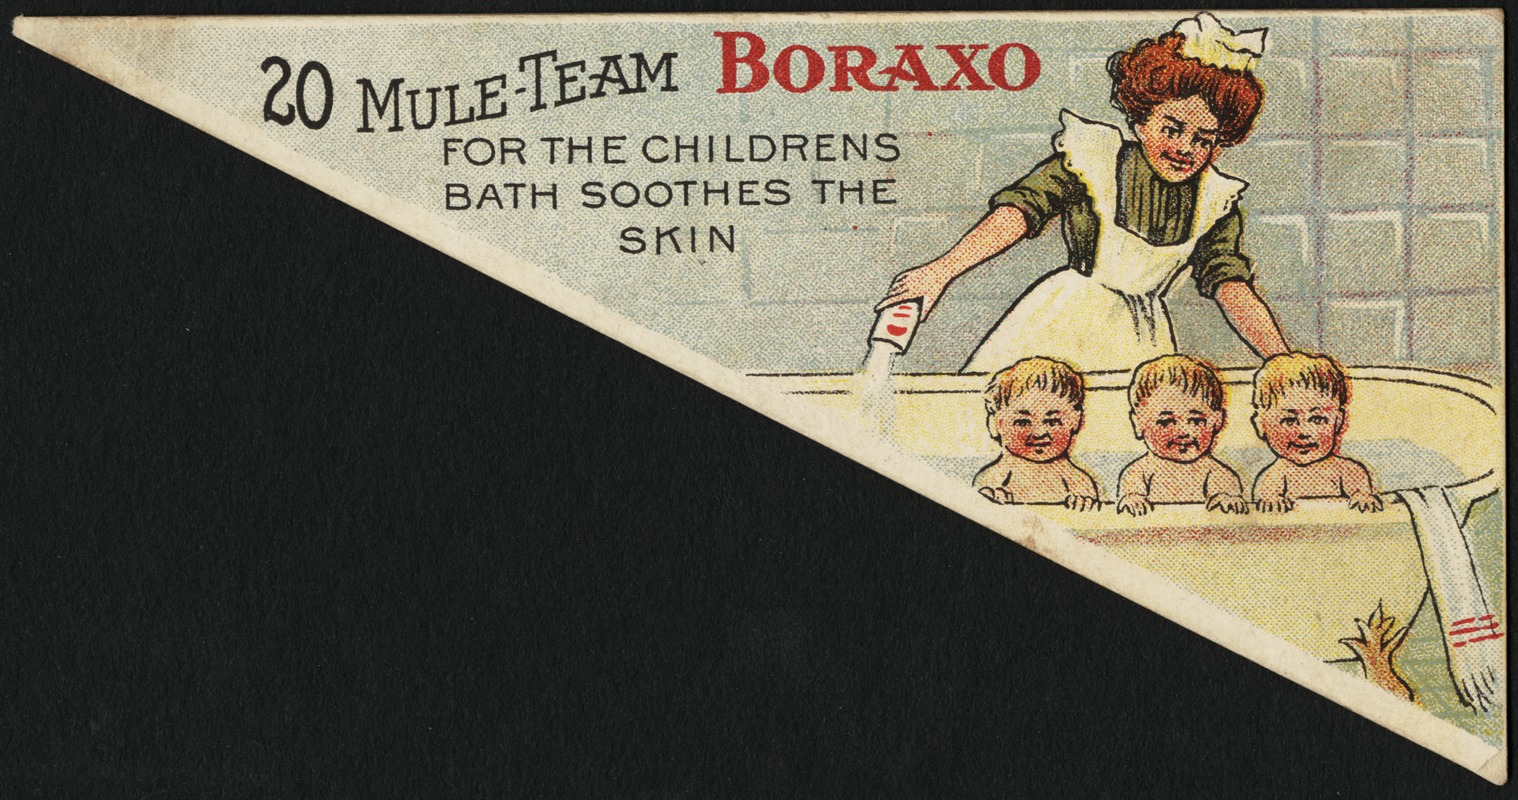 20 Mule-Team Boraxo for the childrens bath sooths the skin